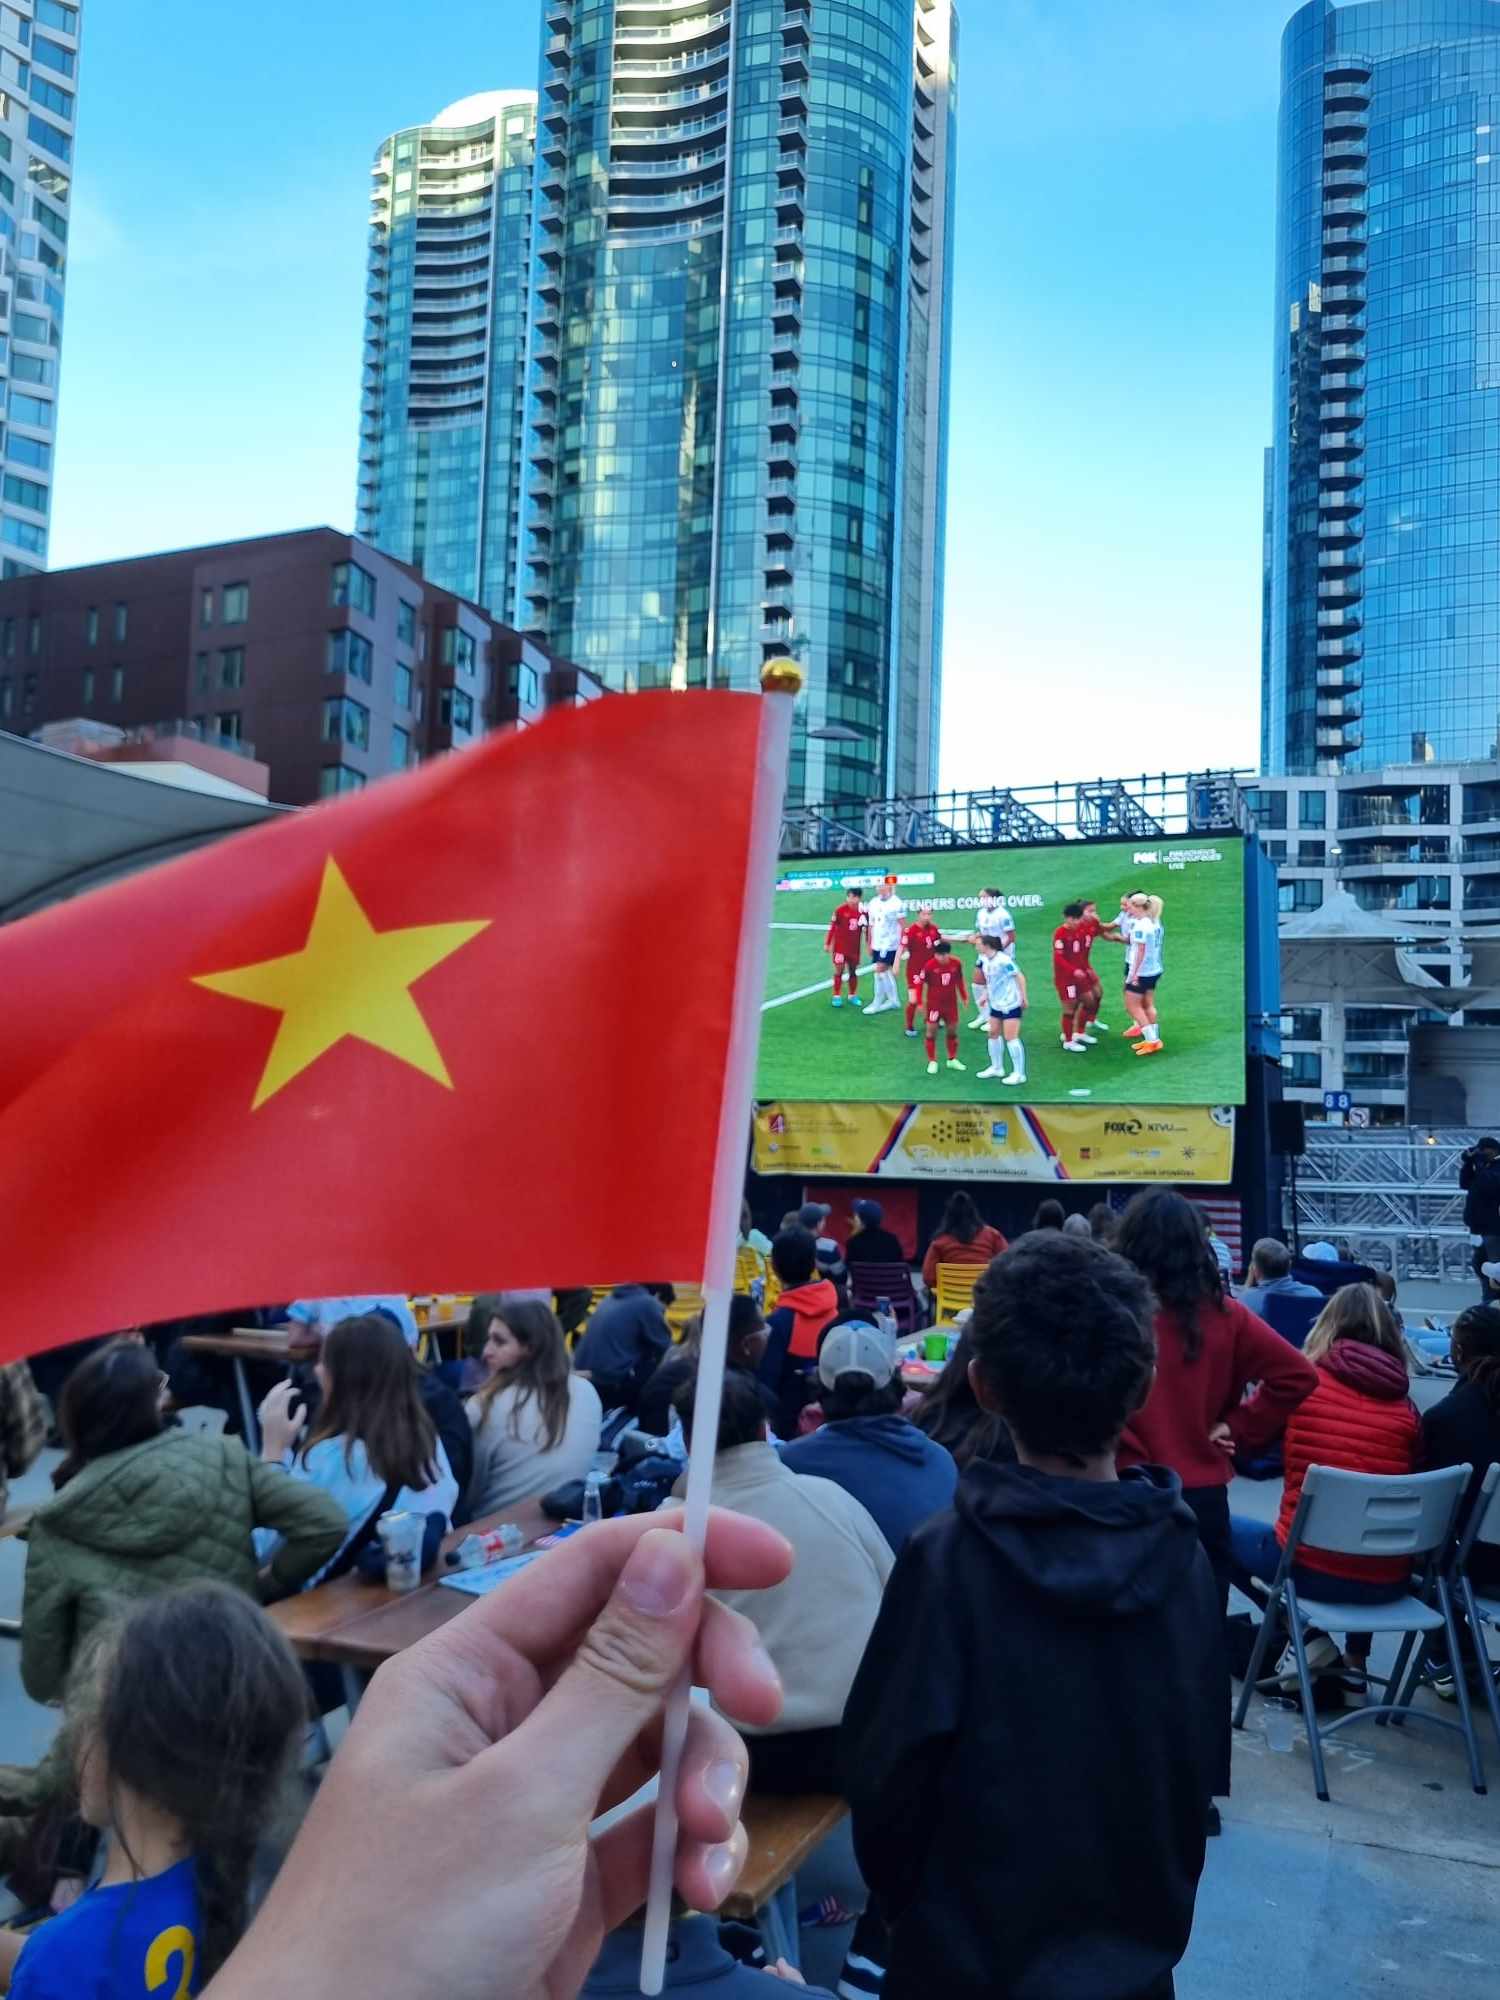 Kien cheering for the Vietnam Women's National Soccer Team in the World Cup match against the US Women's National Soccer Team